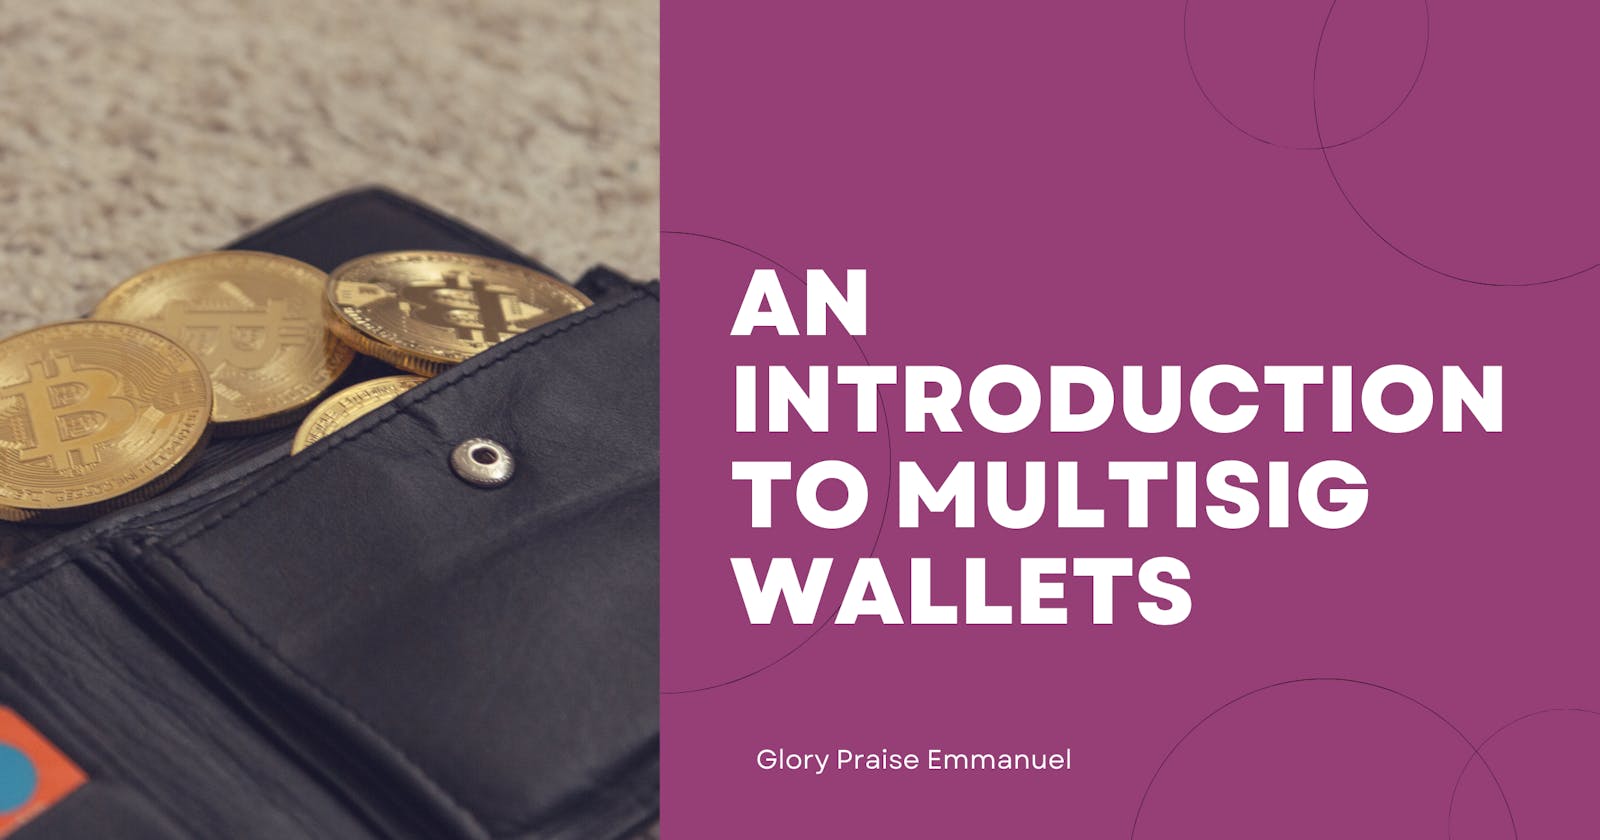 An Introduction to Multisig Wallets